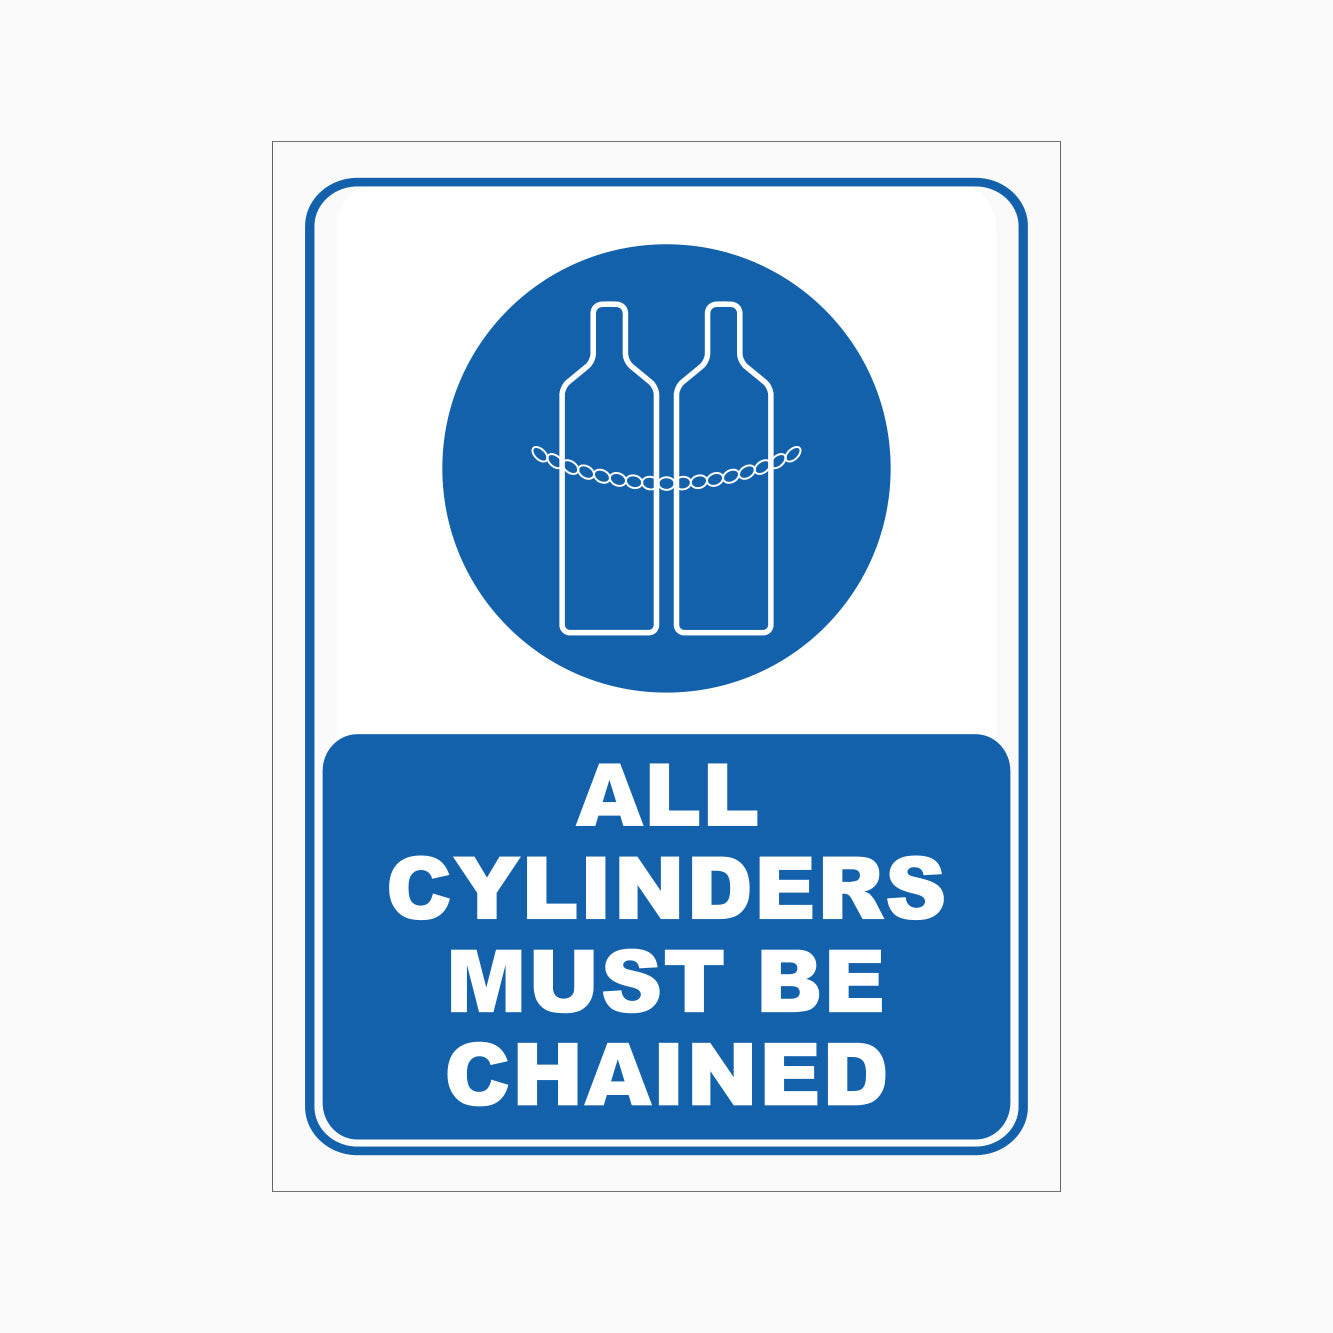 ALL CYLINDERS MUST BE CHAINED SIGN